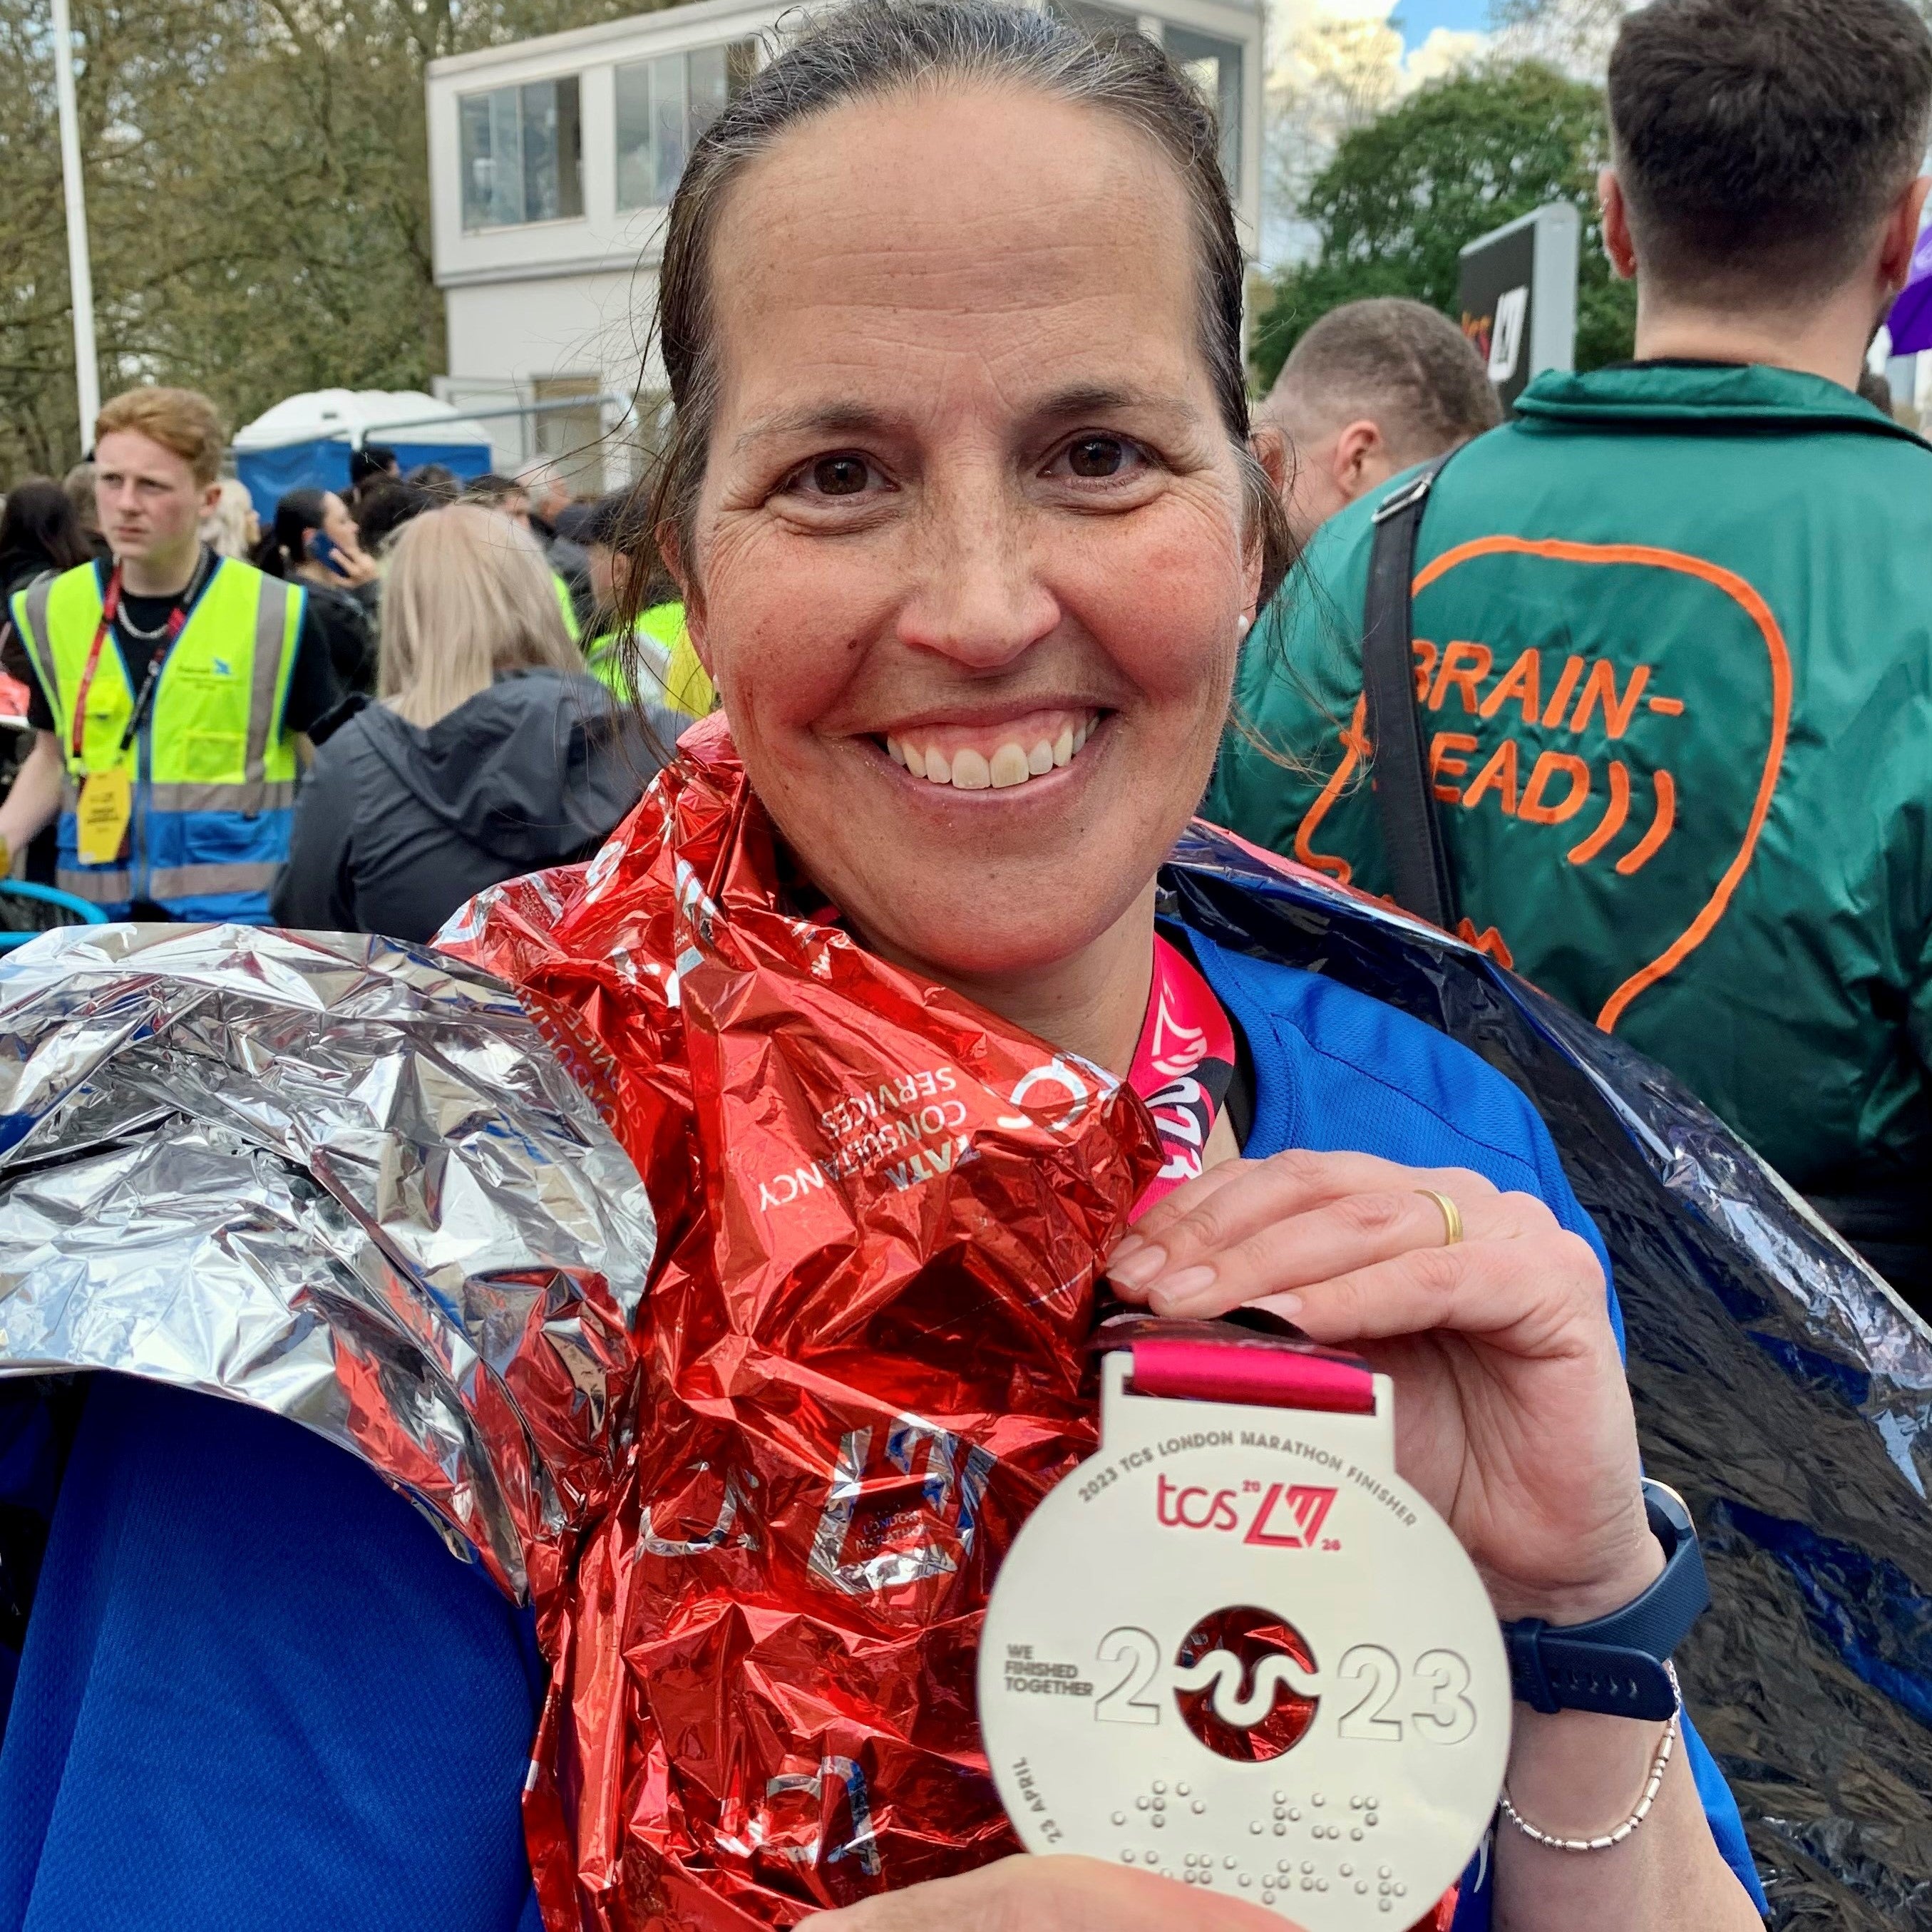 A great training plan, sleeping well, staying hydrated and support from family and friends helped Lesley get through the marathon with ease